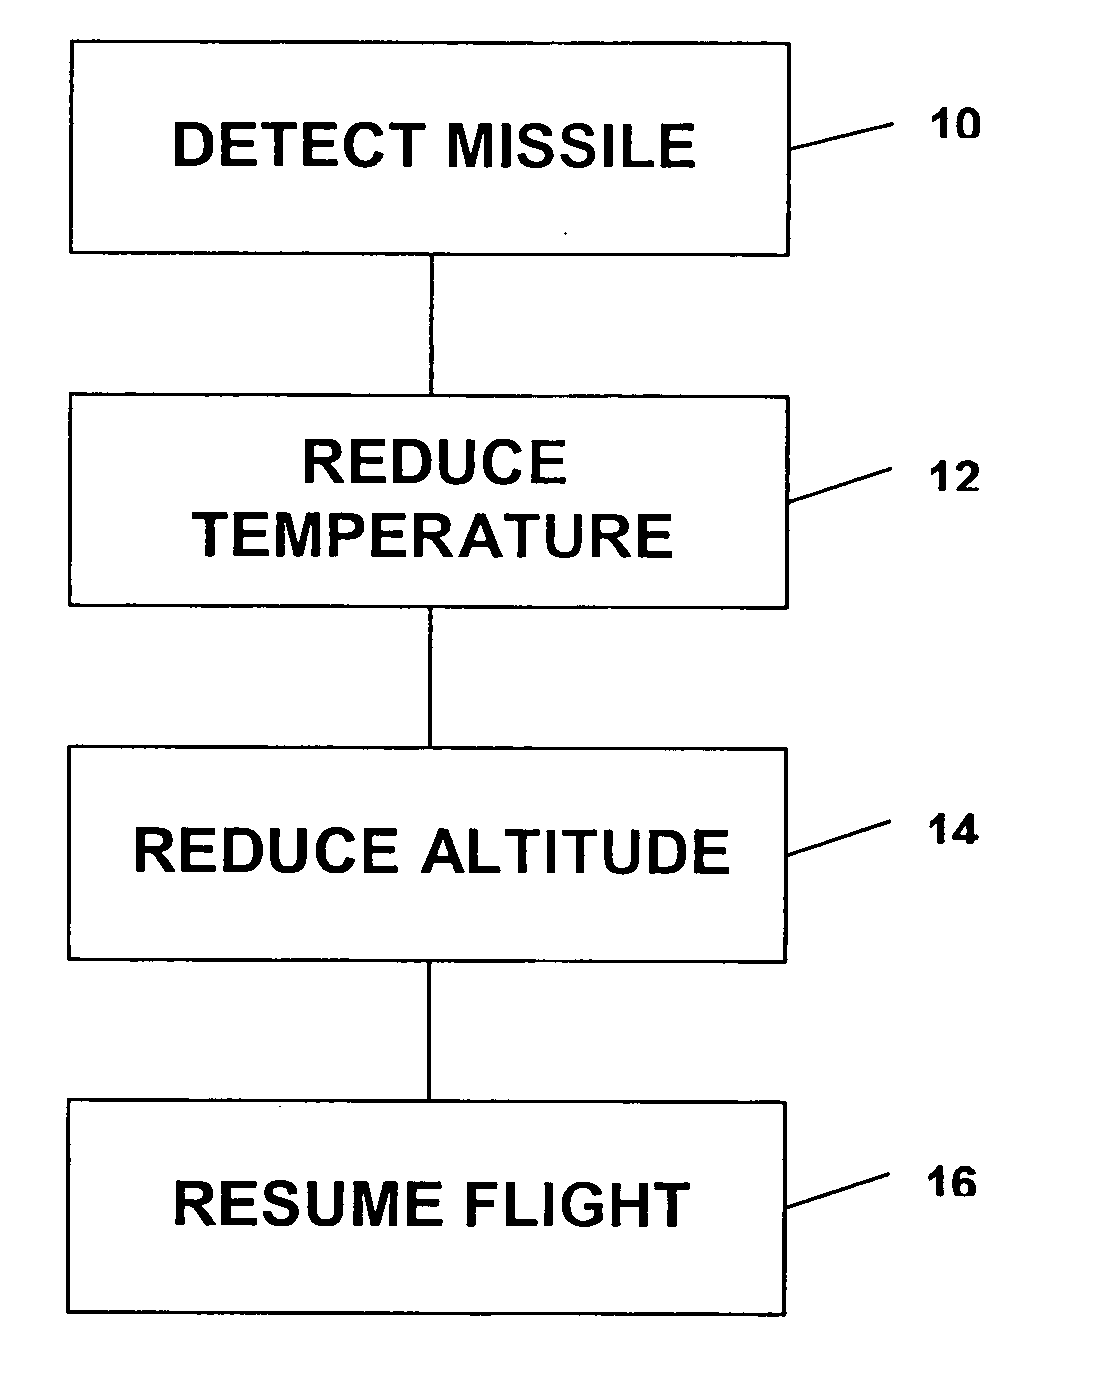 Missile defense system and methods for evading heat seeking missiles